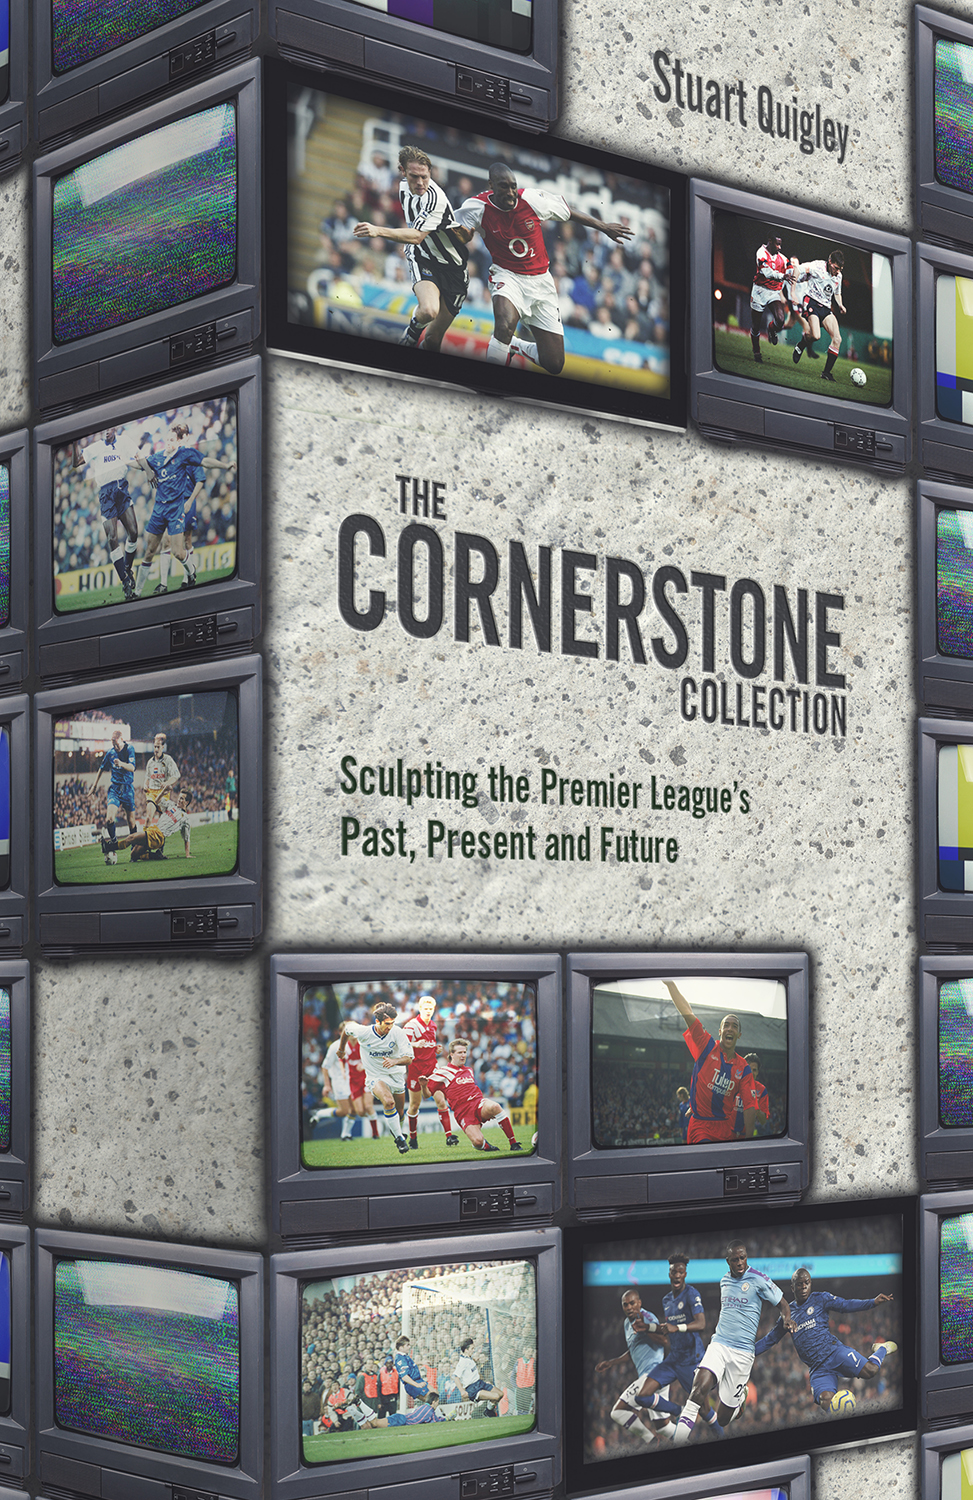 The Cornerstone Collection